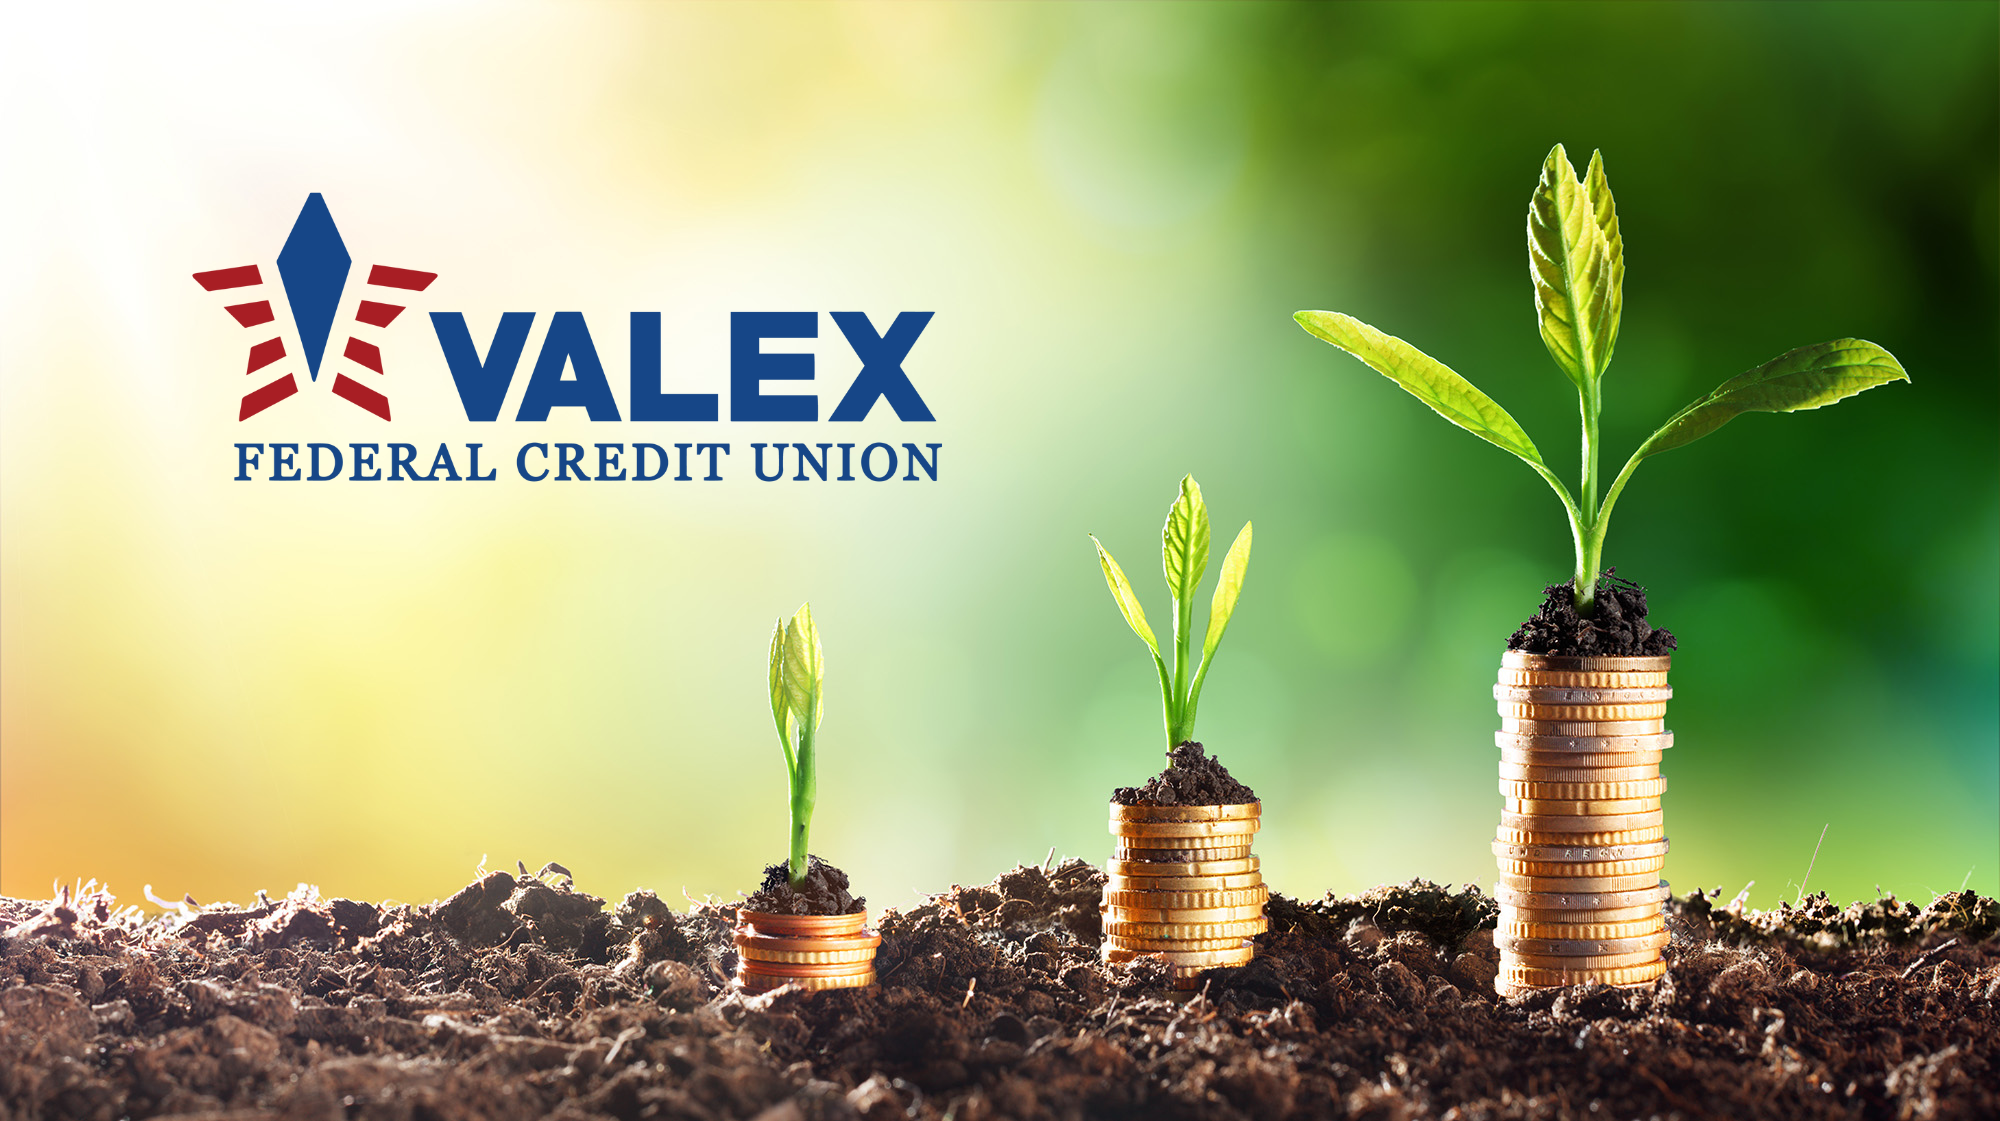 Valex Federal Credit Union - Plant the Seed and Watch it Grow